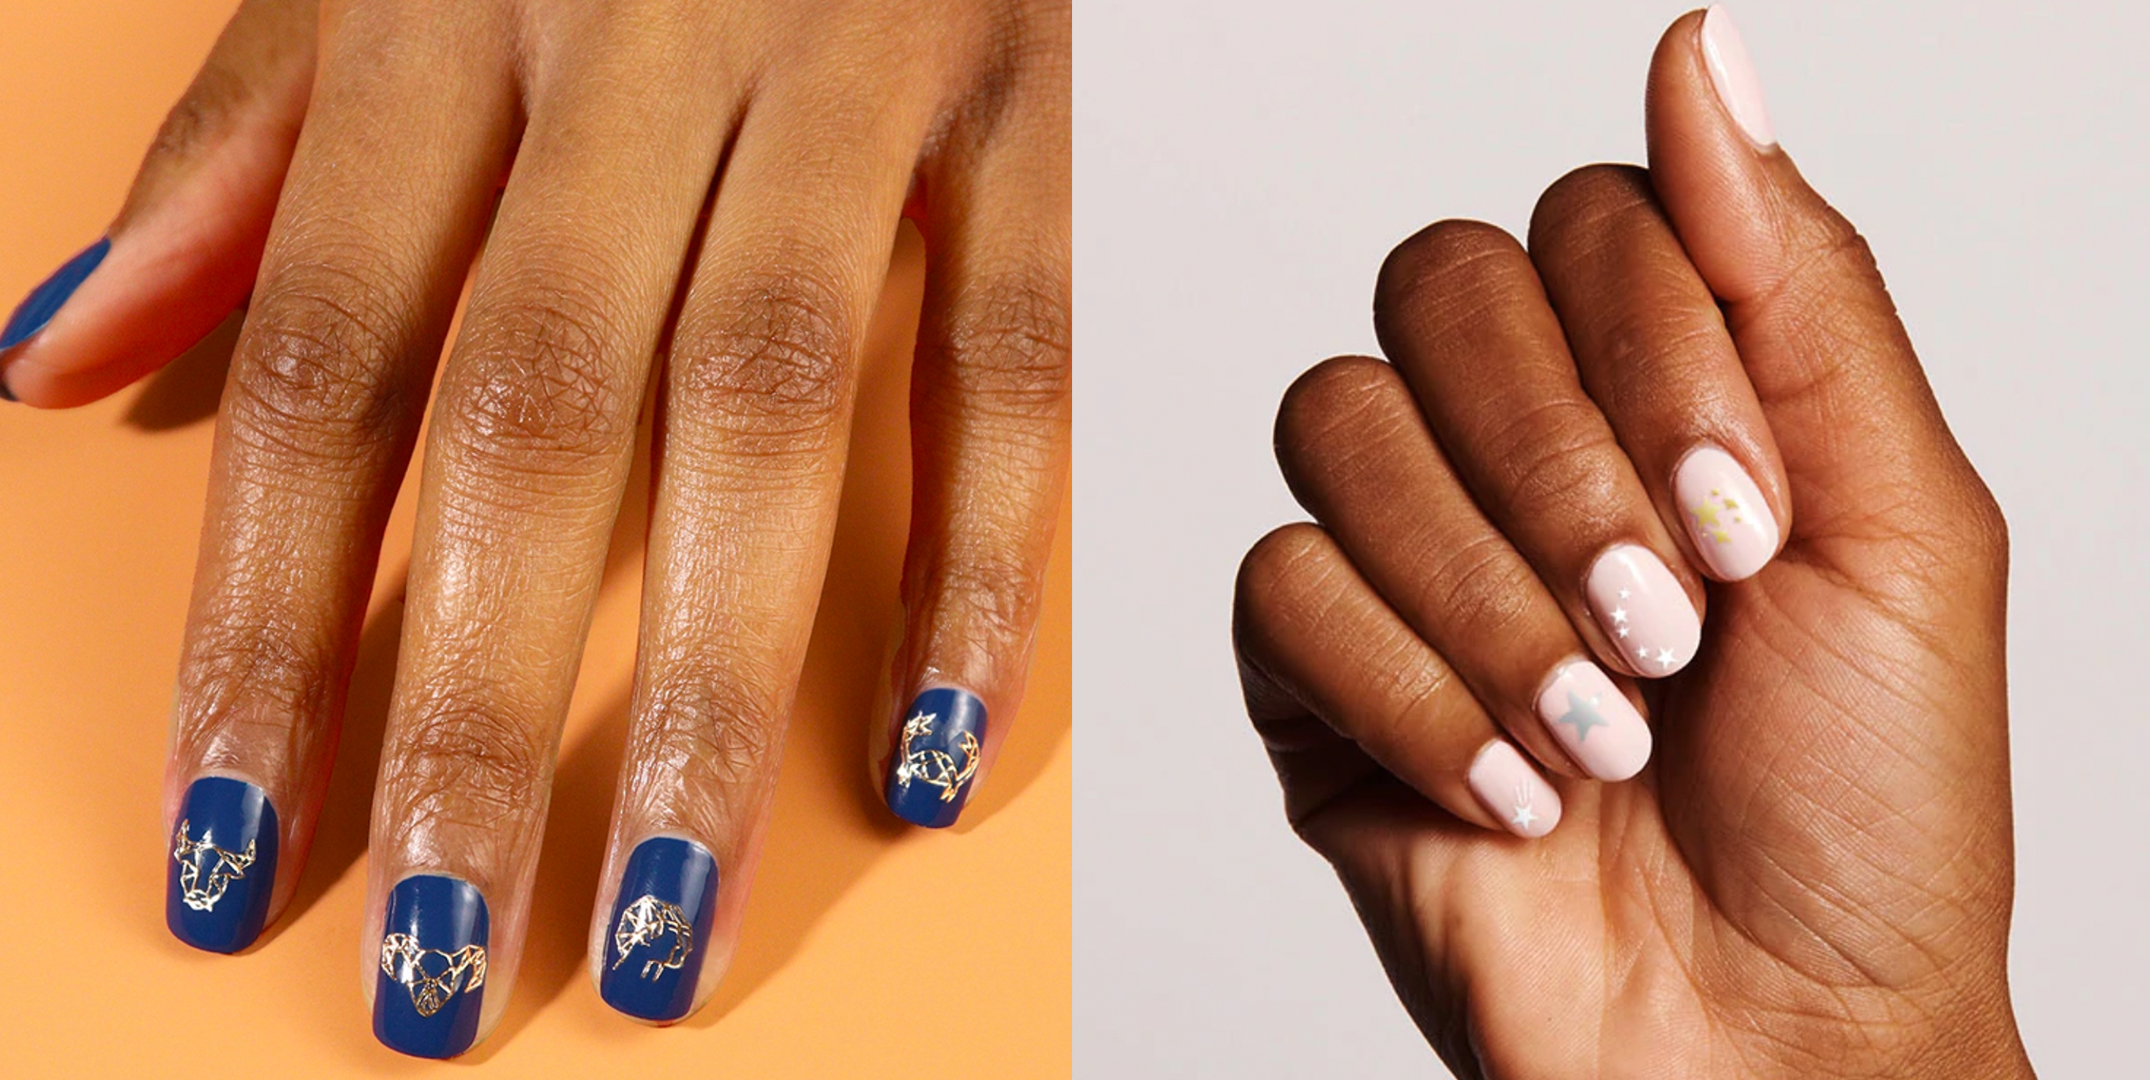 Expert Advice On How To File The Most-Requested Nail Shapes | Nailpro